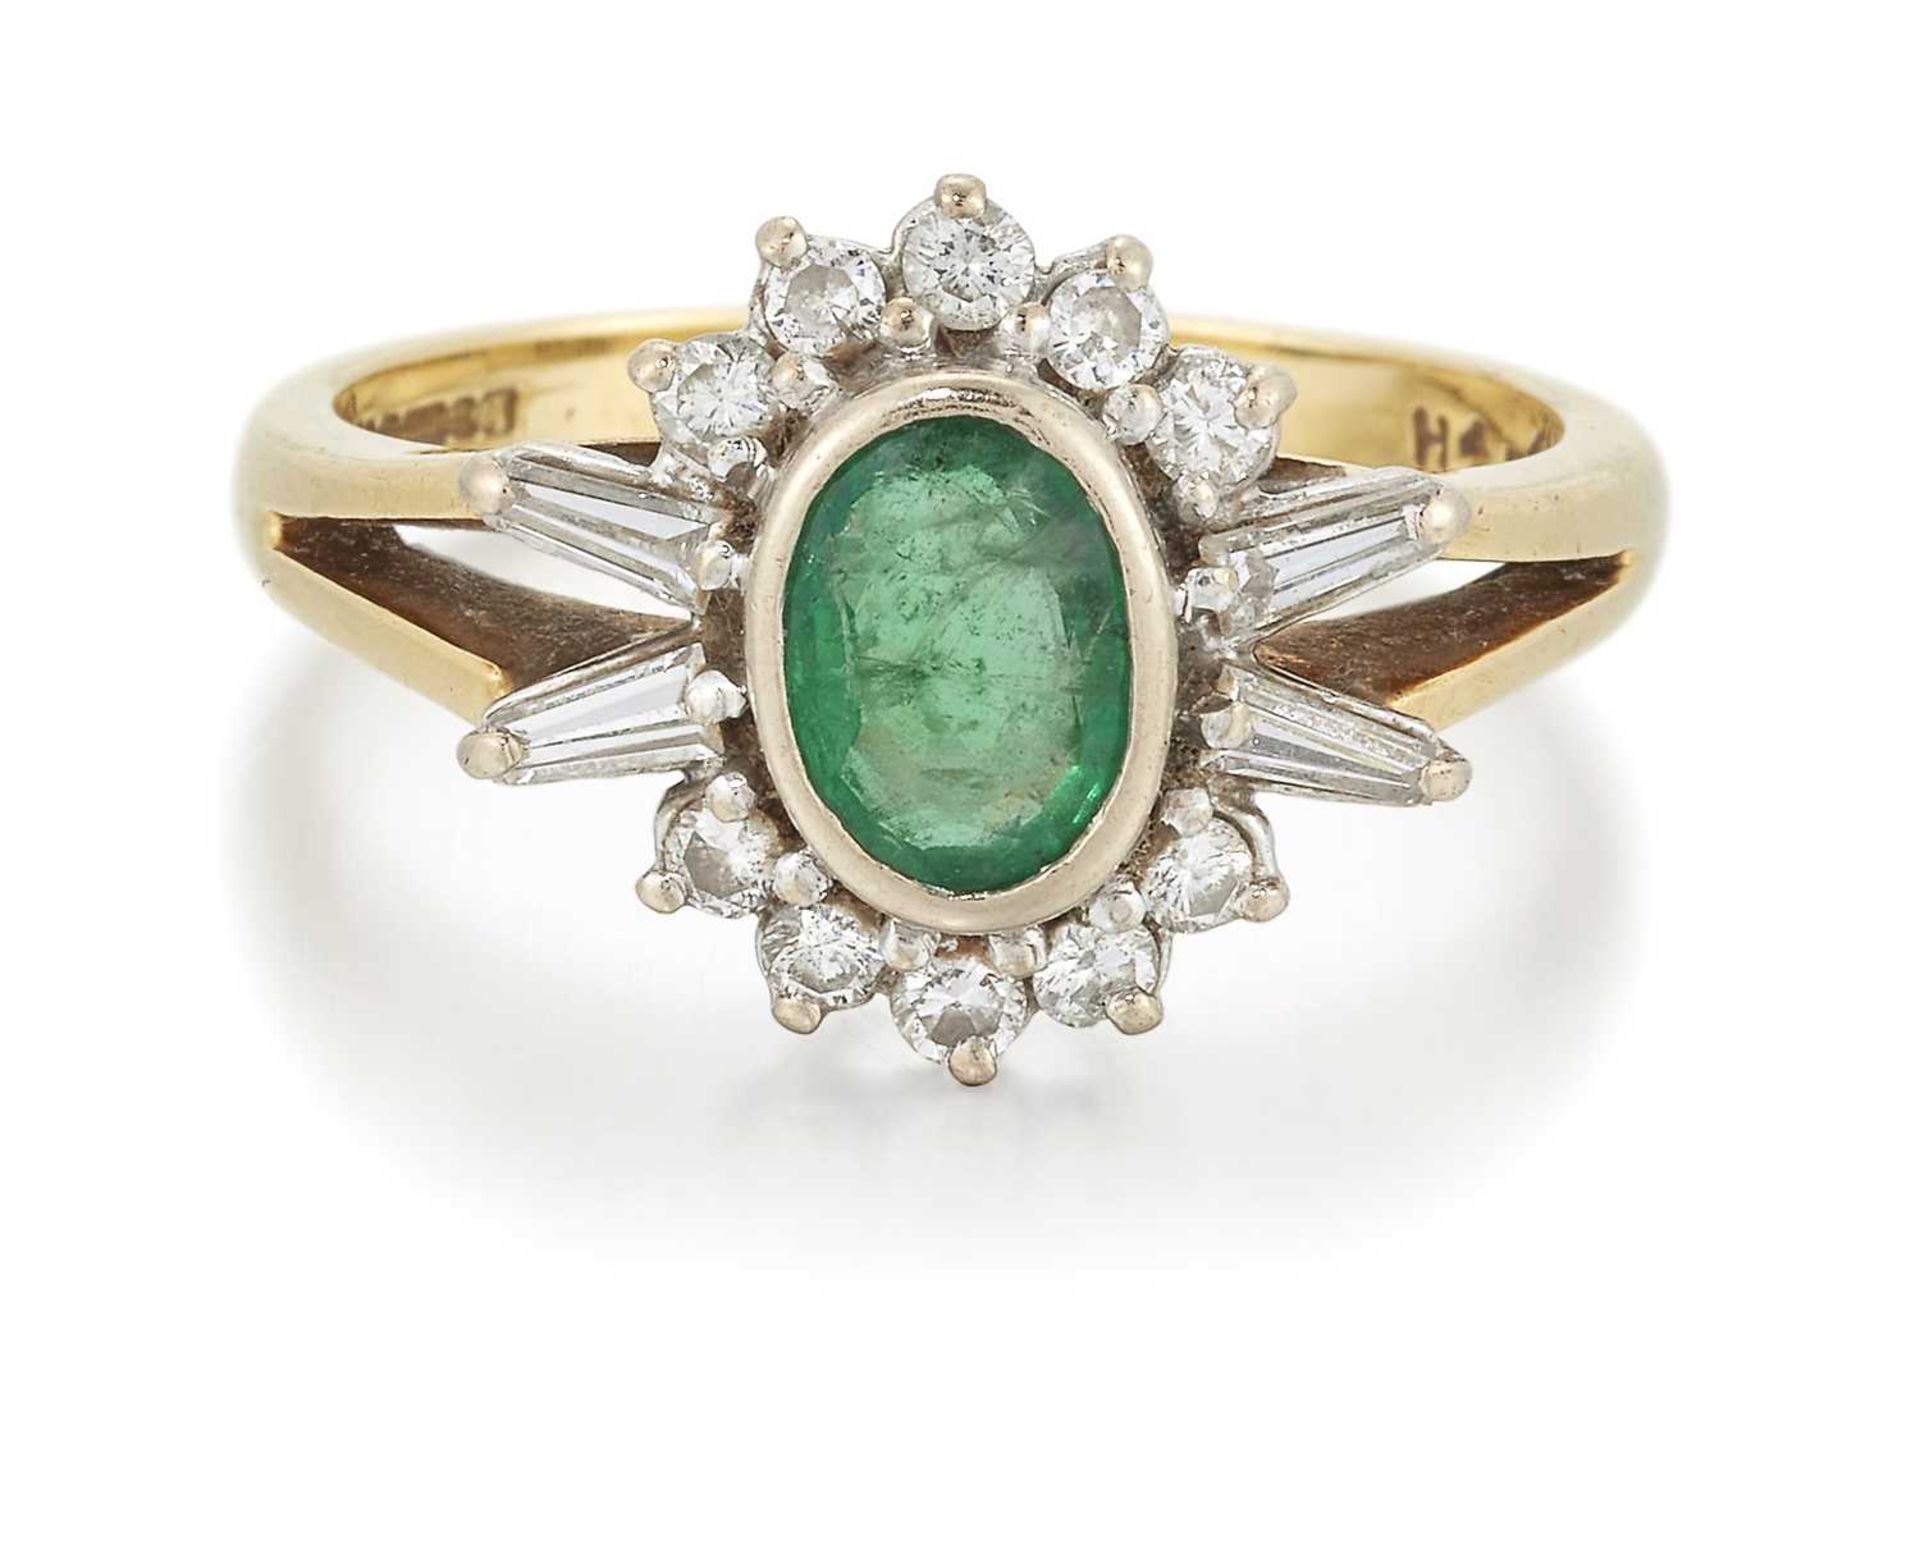 AN 18 CARAT GOLD EMERALD AND DIAMOND CLUSTER RING